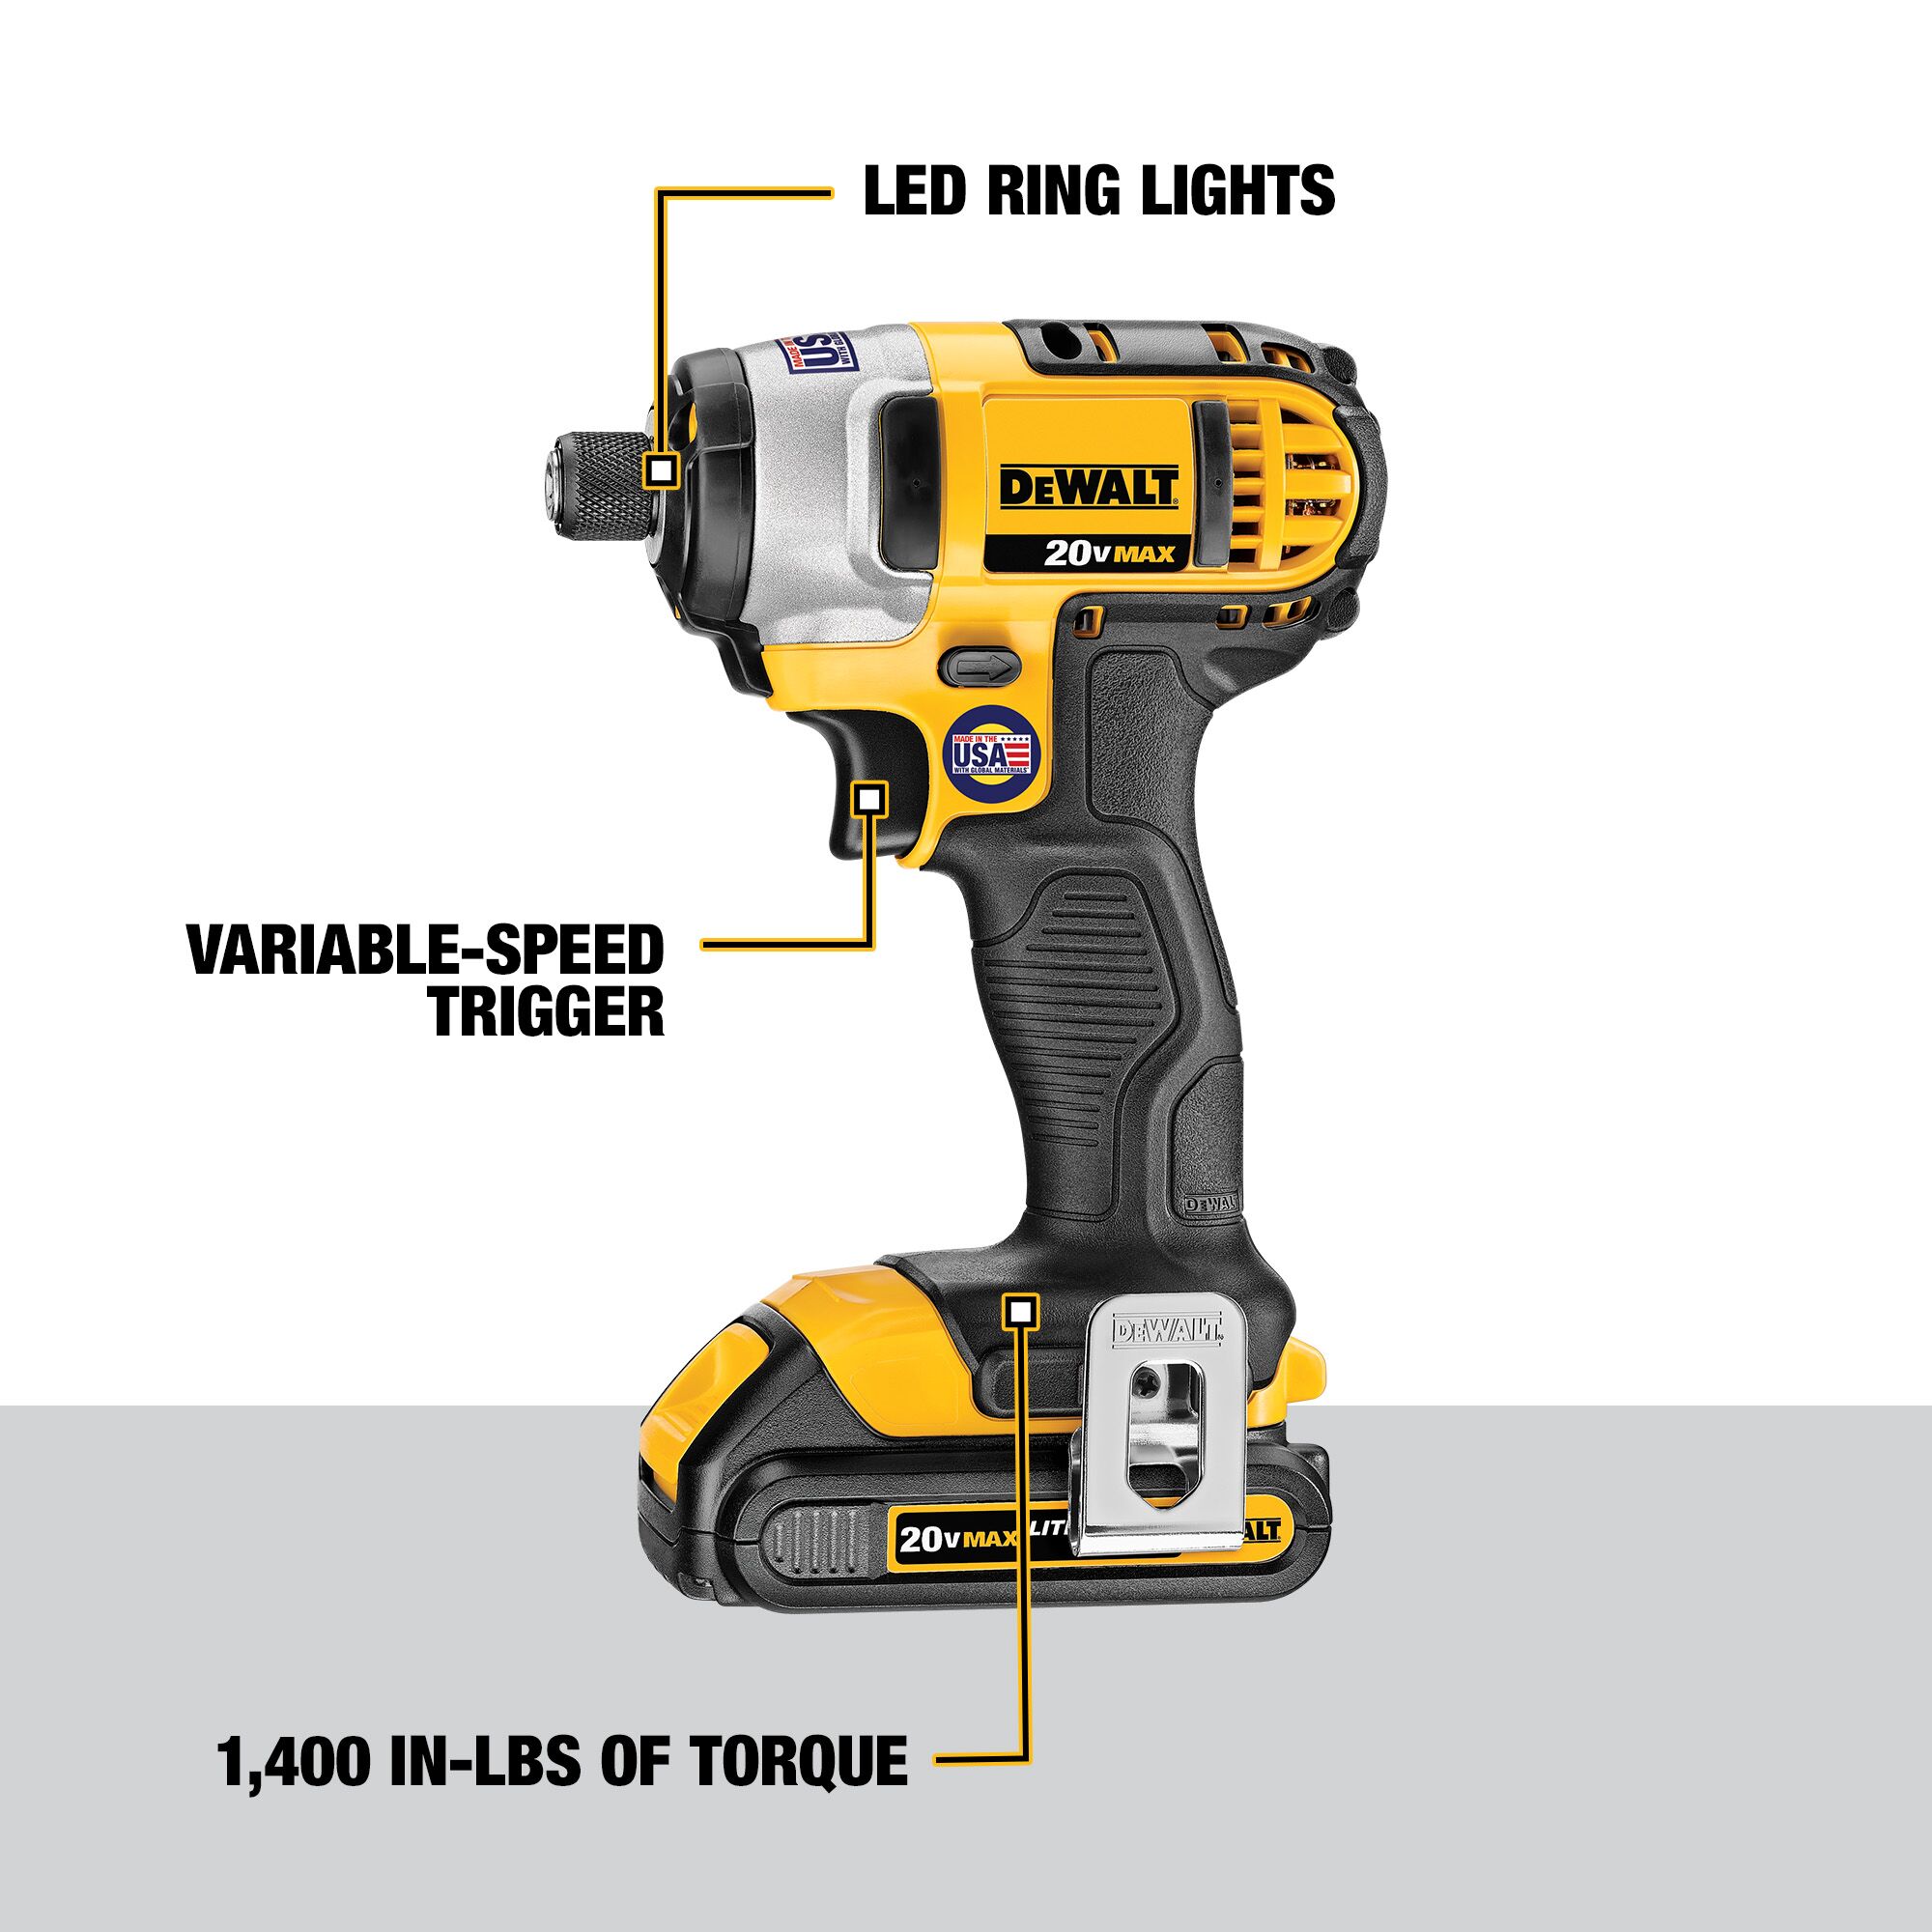 20V Max* Lithium 2-Speed Drill/Driver With Storage Bag + Fast Charger